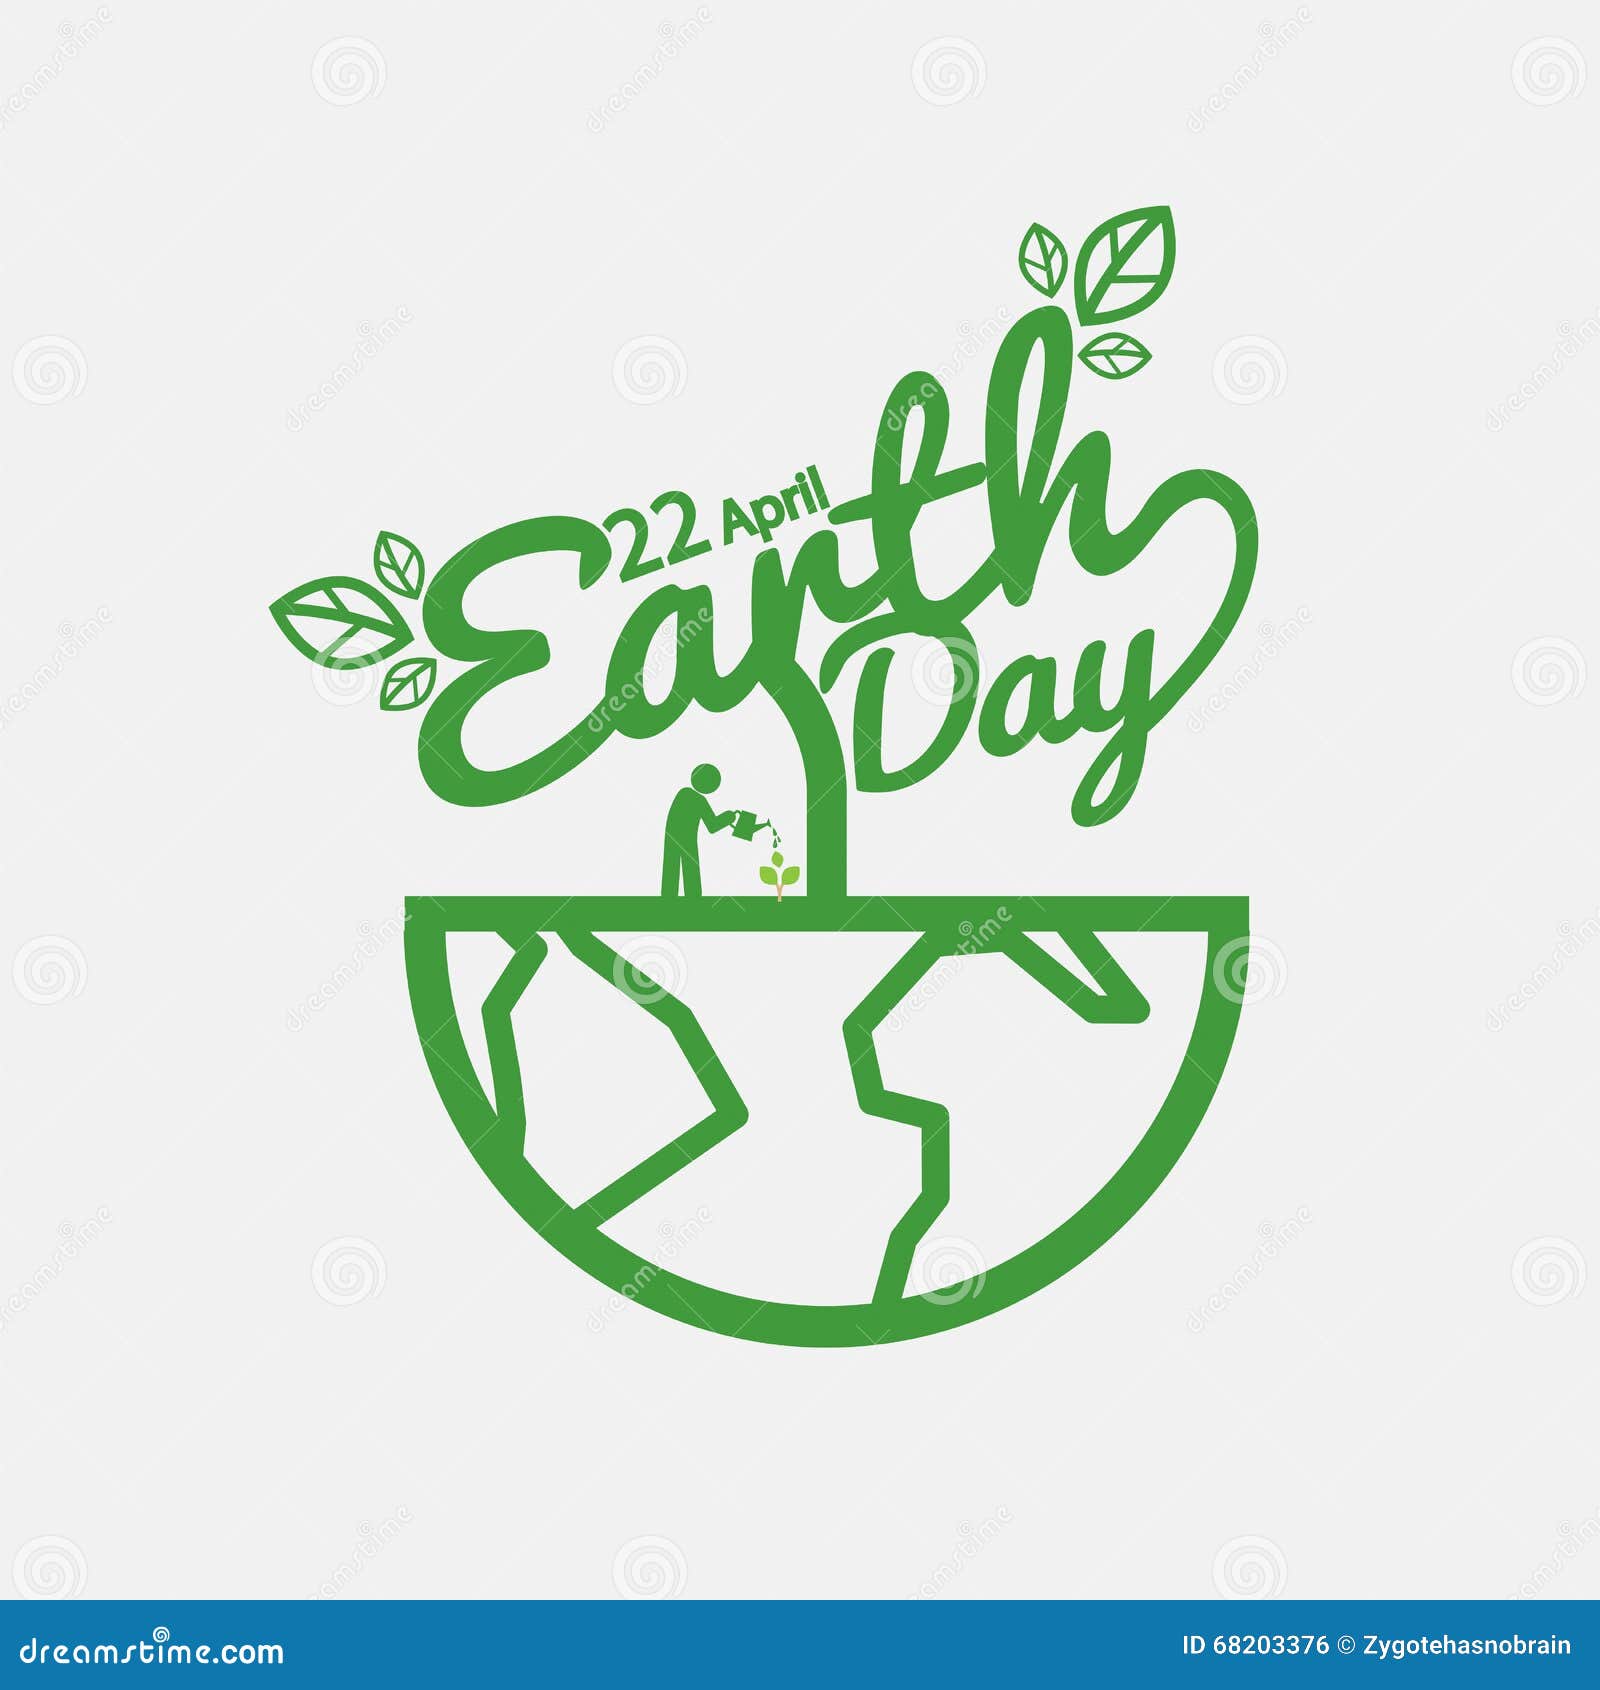 free clipart earth day april 22 - photo #8